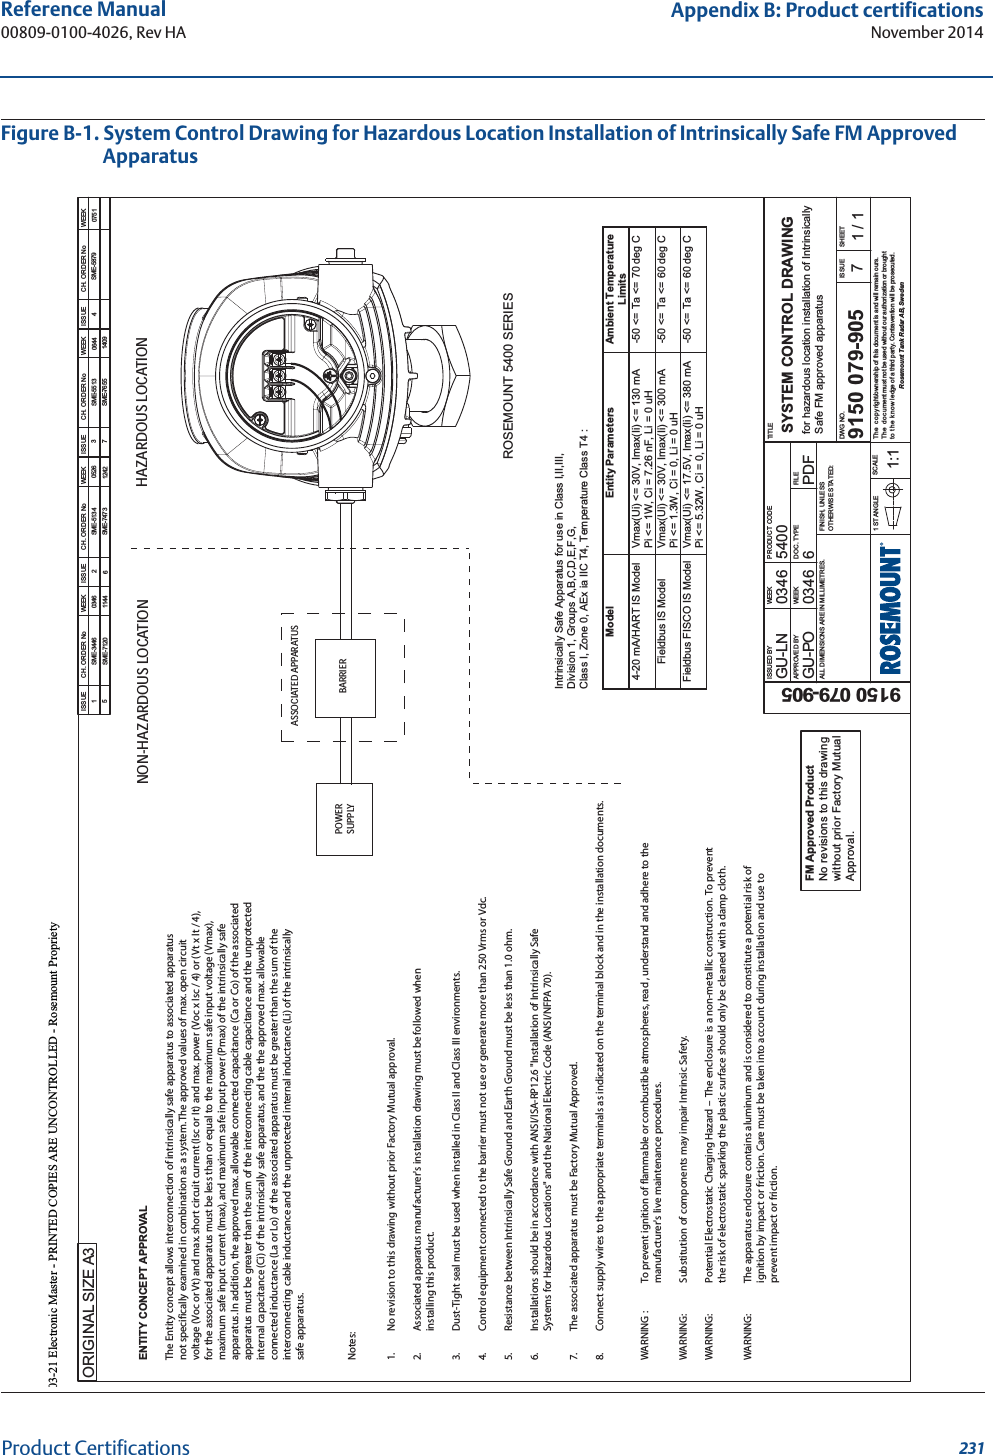 231Reference Manual 00809-0100-4026, Rev HAAppendix B: Product certificationsNovember 2014Product CertificationsFigure B-1. System Control Drawing for Hazardous Location Installation of Intrinsically Safe FM Approved ApparatusFM Approved ProductNo revisions to this drawingwithout prior Factory MutualApproval.SME-3446 03461 ISSUE CH. ORDER No WEEK ISSUE CH. ORDER No WEEK ISSUE CH. ORDER No WEEK ISSUE CH. ORDER No WEEKA3ORIGINAL SIZEGU-LN03465400GU-PO 6 PDF9150 079-9059150 079-9050346 SYSTEM CONTROL DRAWINGfor hazardous location installation of IntrinsicallySafe FM approved apparatus71 / 1ISSUED BYAPPROVED BYWEEKWEEKPRODUCT CODEDOC. TYPE FILETITLEDWG NO. ISSUE SHEETSCALE1:11 ST ANGLEFINISH, UNLESSOTHERWISE STATED:ALL DIMENSIONS ARE IN MILLIMETRES.The copyright/ownership of this document is and will remain ours.The document must not be used without our authorization or broughtto the knowledge of a third party. Contravention will be prosecuted.Rosemount Tank Radar AB, SwedenASSOCIATED APPARATUSBARRIERPOWERSUPPLYHAZARDOUS LOCATIONNON-HAZARDOUS LOCATIONENTITY CONCEPT APPROVALThe Entity concept allows interconnection of intrinsically safe apparatus to associated apparatus not specifically examined in combination as a system. The approved values of max. open circuit voltage (Voc or Vt) and max. short circuit current (Isc or It) and max. power (Voc x Isc / 4) or (Vt x It / 4), for the associated apparatus must be less than or equal to the maximum safe input voltage (Vmax), maximum safe input current (Imax), and maximum safe input power (Pmax) of the intrinsically safe apparatus. In addition, the approved max. allowable connected capacitance (Ca or Co) of the associated apparatus must be greater than the sum of the interconnecting cable capacitance and the unprotected internal capacitance (Ci) of the intrinsically safe apparatus, and the the approved max. allowable connected inductance (La or Lo) of the associated apparatus must be greater than the sum of the interconnecting cable inductance and the unprotected internal inductance (Li) of the intrinsicallysafe apparatus.Notes:1.  No revision to this drawing without prior Factory Mutual approval.2.  Associated apparatus manufacturer&apos;s installation drawing must be followed when   installing this product.3.  Dust-Tight seal must be used when installed in Class II and Class III environments.4.  Control equipment connected to the barrier must not use or generate more than 250 Vrms or Vdc.5.  Resistance between Intrinsically Safe Ground and Earth Ground must be less than 1.0 ohm.6.  Installations should be in accordance with ANSI/ISA-RP12.6 &quot;Installation of Intrinsically Safe  Systems for Hazardous Locations&quot; and the National Electric Code (ANSI/NFPA 70).7.  The associated apparatus must be Factory Mutual Approved.8.  Connect supply wires to the appropriate terminals as indicated on the terminal block and in the installation documents.ROSEMOUNT 5400 SERIESIntrinsically Safe Apparatus for use in Class I,II,III,Division 1, Groups A,B,C,D,E,F,G,Class I, Zone 0, AEx ia IIC T4, Temperature Class T4 :Model Entity Parameters Ambient TemperatureLimits4-20 mA/HART IS Model Vmax(Ui) &lt;= 30V, Imax(Ii) &lt;= 130 mAPi &lt;= 1W, Ci = 7.26 nF, Li = 0 uH -50&lt;=Ta&lt;=70degCFieldbus IS Model Vmax(Ui) &lt;= 30V, Imax(Ii) &lt;= 300 mAPi &lt;= 1.3W, Ci = 0, Li = 0 uH-50&lt;=Ta&lt;=60degCFieldbus FISCO IS Model Vmax(Ui) &lt;= 17.5V, Imax(Ii) &lt;= 380 mAPi &lt;= 5.32W, Ci = 0, Li = 0 uH-50&lt;=Ta&lt;=60degC2 SME-5134 0526 3SME-5513 0644 4SME-5879 0751 5 SME-7120 1144 SME-7473 1242 7 SME-7655 1409WARNING :   To prevent ignition of flammable or combustible atmospheres, read , understand and adhere to the    manufacturer&apos;s live maintenance procedures.WARNING:  Substitution of components may impair Intrinsic Safety.WARNING:  Potential Electrostatic Charging Hazard –  The enclosure is a non-metallic construction.  To prevent     the risk of electrostatic sparking the plastic surface should only be cleaned with a damp cloth.WARNING:  The apparatus enclosure contains aluminum and is considered to constitute a potential risk of     ignition by impact or friction. Care must be taken into account during installation and use to     prevent impact or friction. 603-21 Electronic Master - PRINTED COPIES ARE UNCONTROLLED - Rosemount Propriety